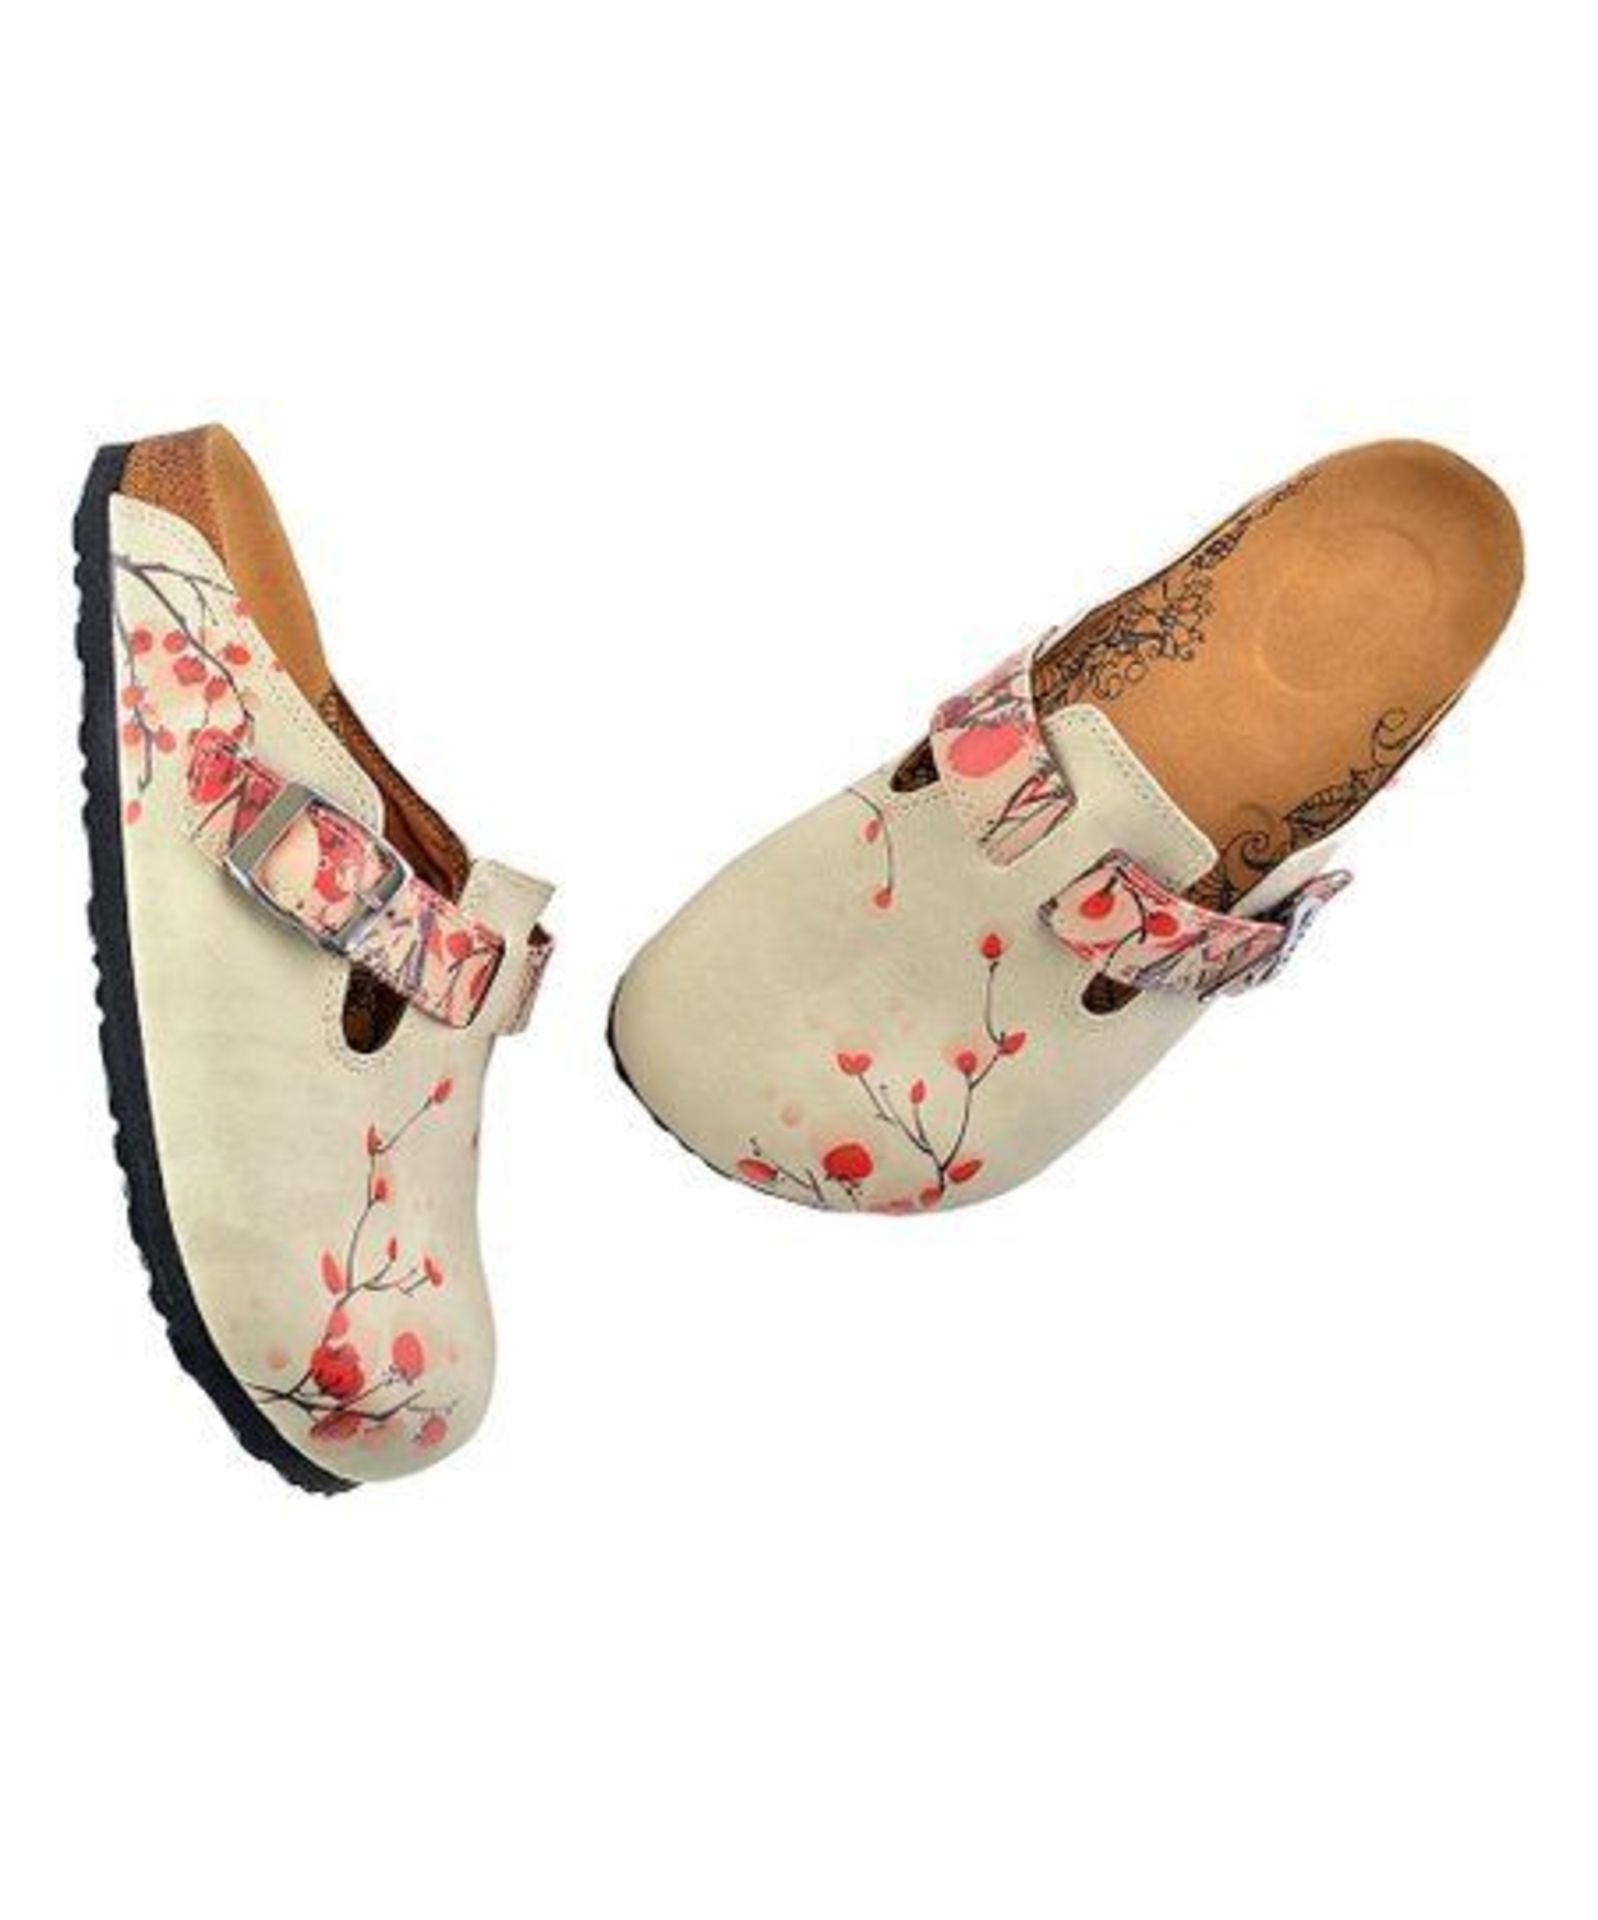 Calceo Cream & Red Floral Slip-On Mule Uk Size: Eur 35 (New With Box) [Ref: 48517104-G-002] - Image 2 of 4